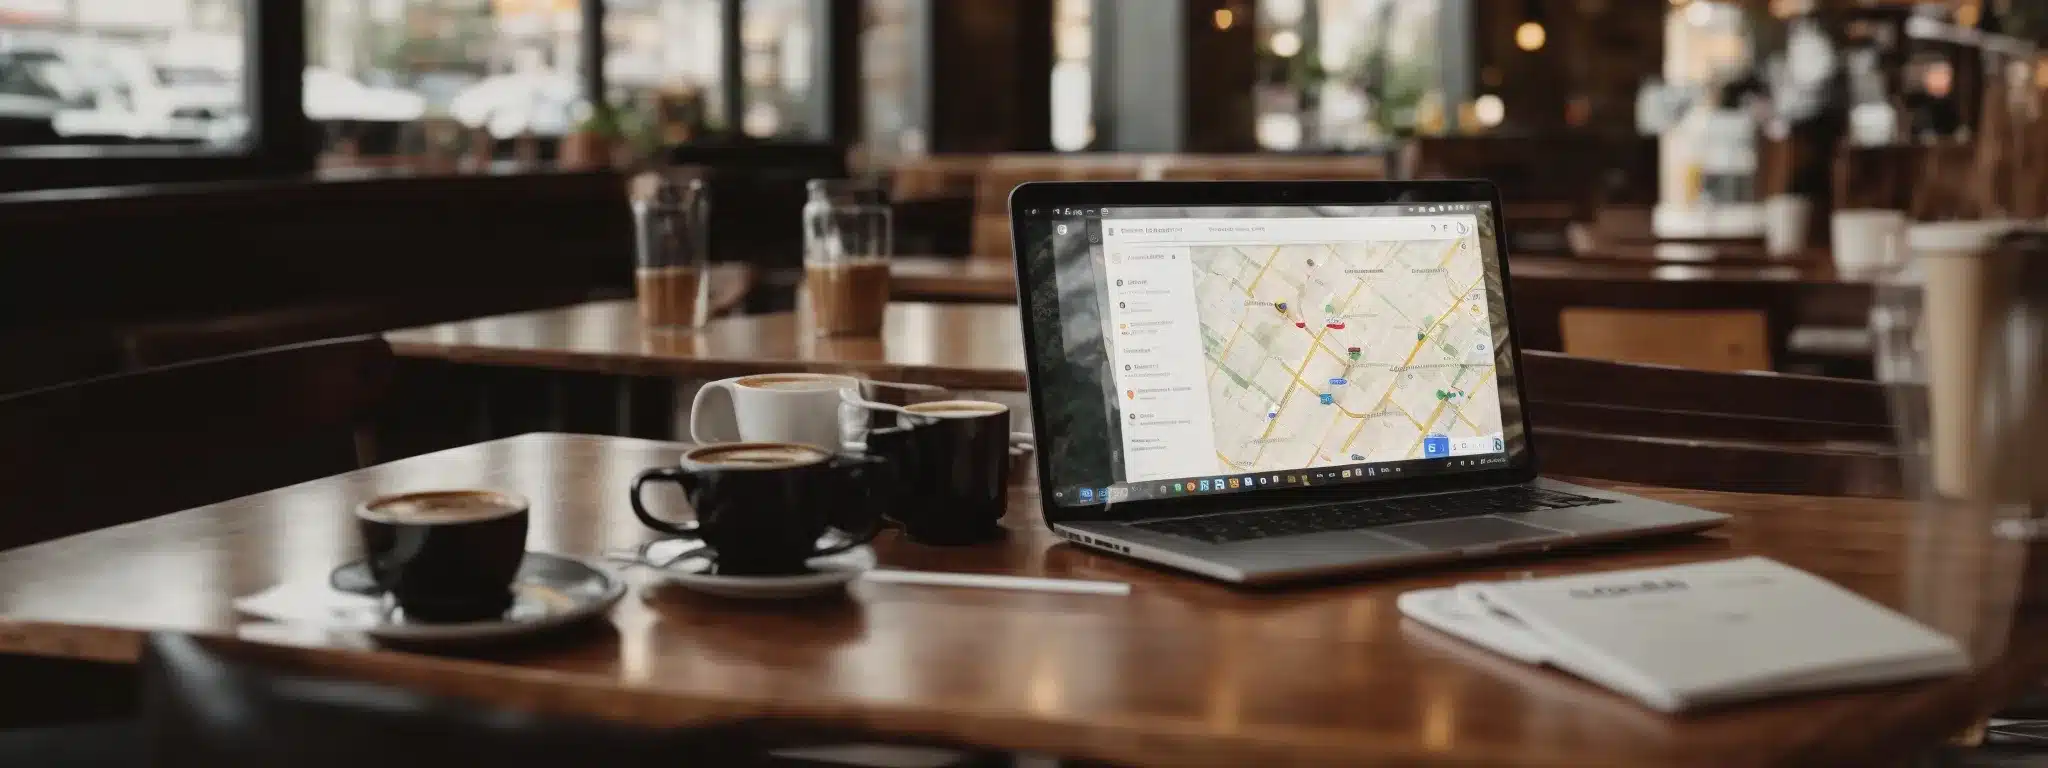 A Laptop With A Google Map Displaying Local Business Pins On A Cafe Table, With A Cup Of Coffee Beside It.